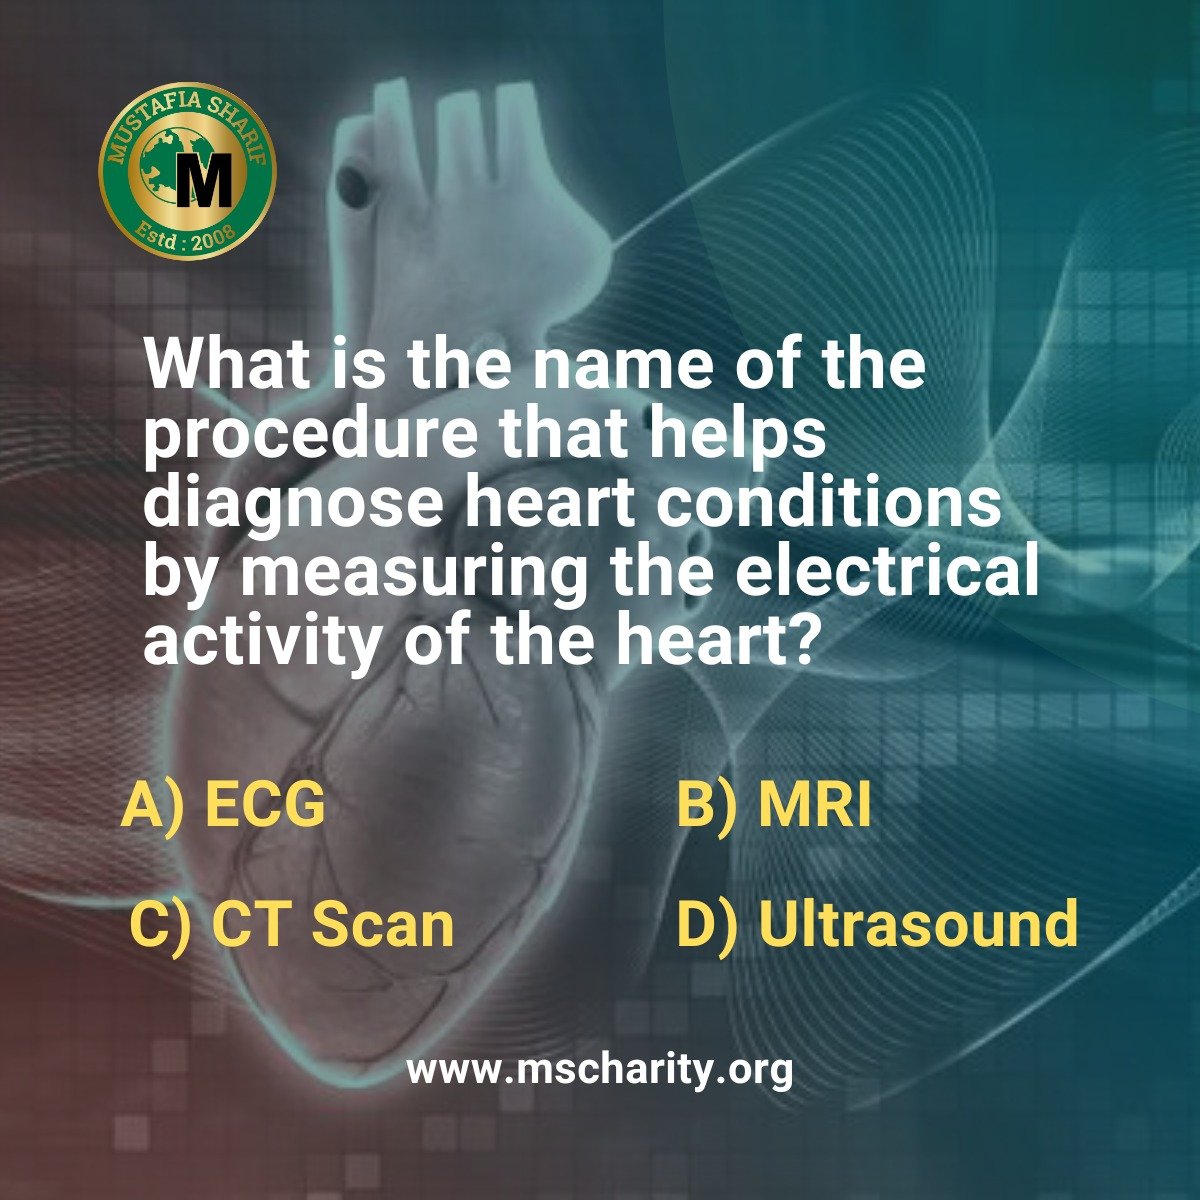 Check your heart health! What procedure diagnoses heart conditions by measuring the heart's electrical activity? #HeartHealth #StressTest #KnowYourHeart #HealthyLife #FactsDaily #FactsOfLife #MSCharity @TNLComFund